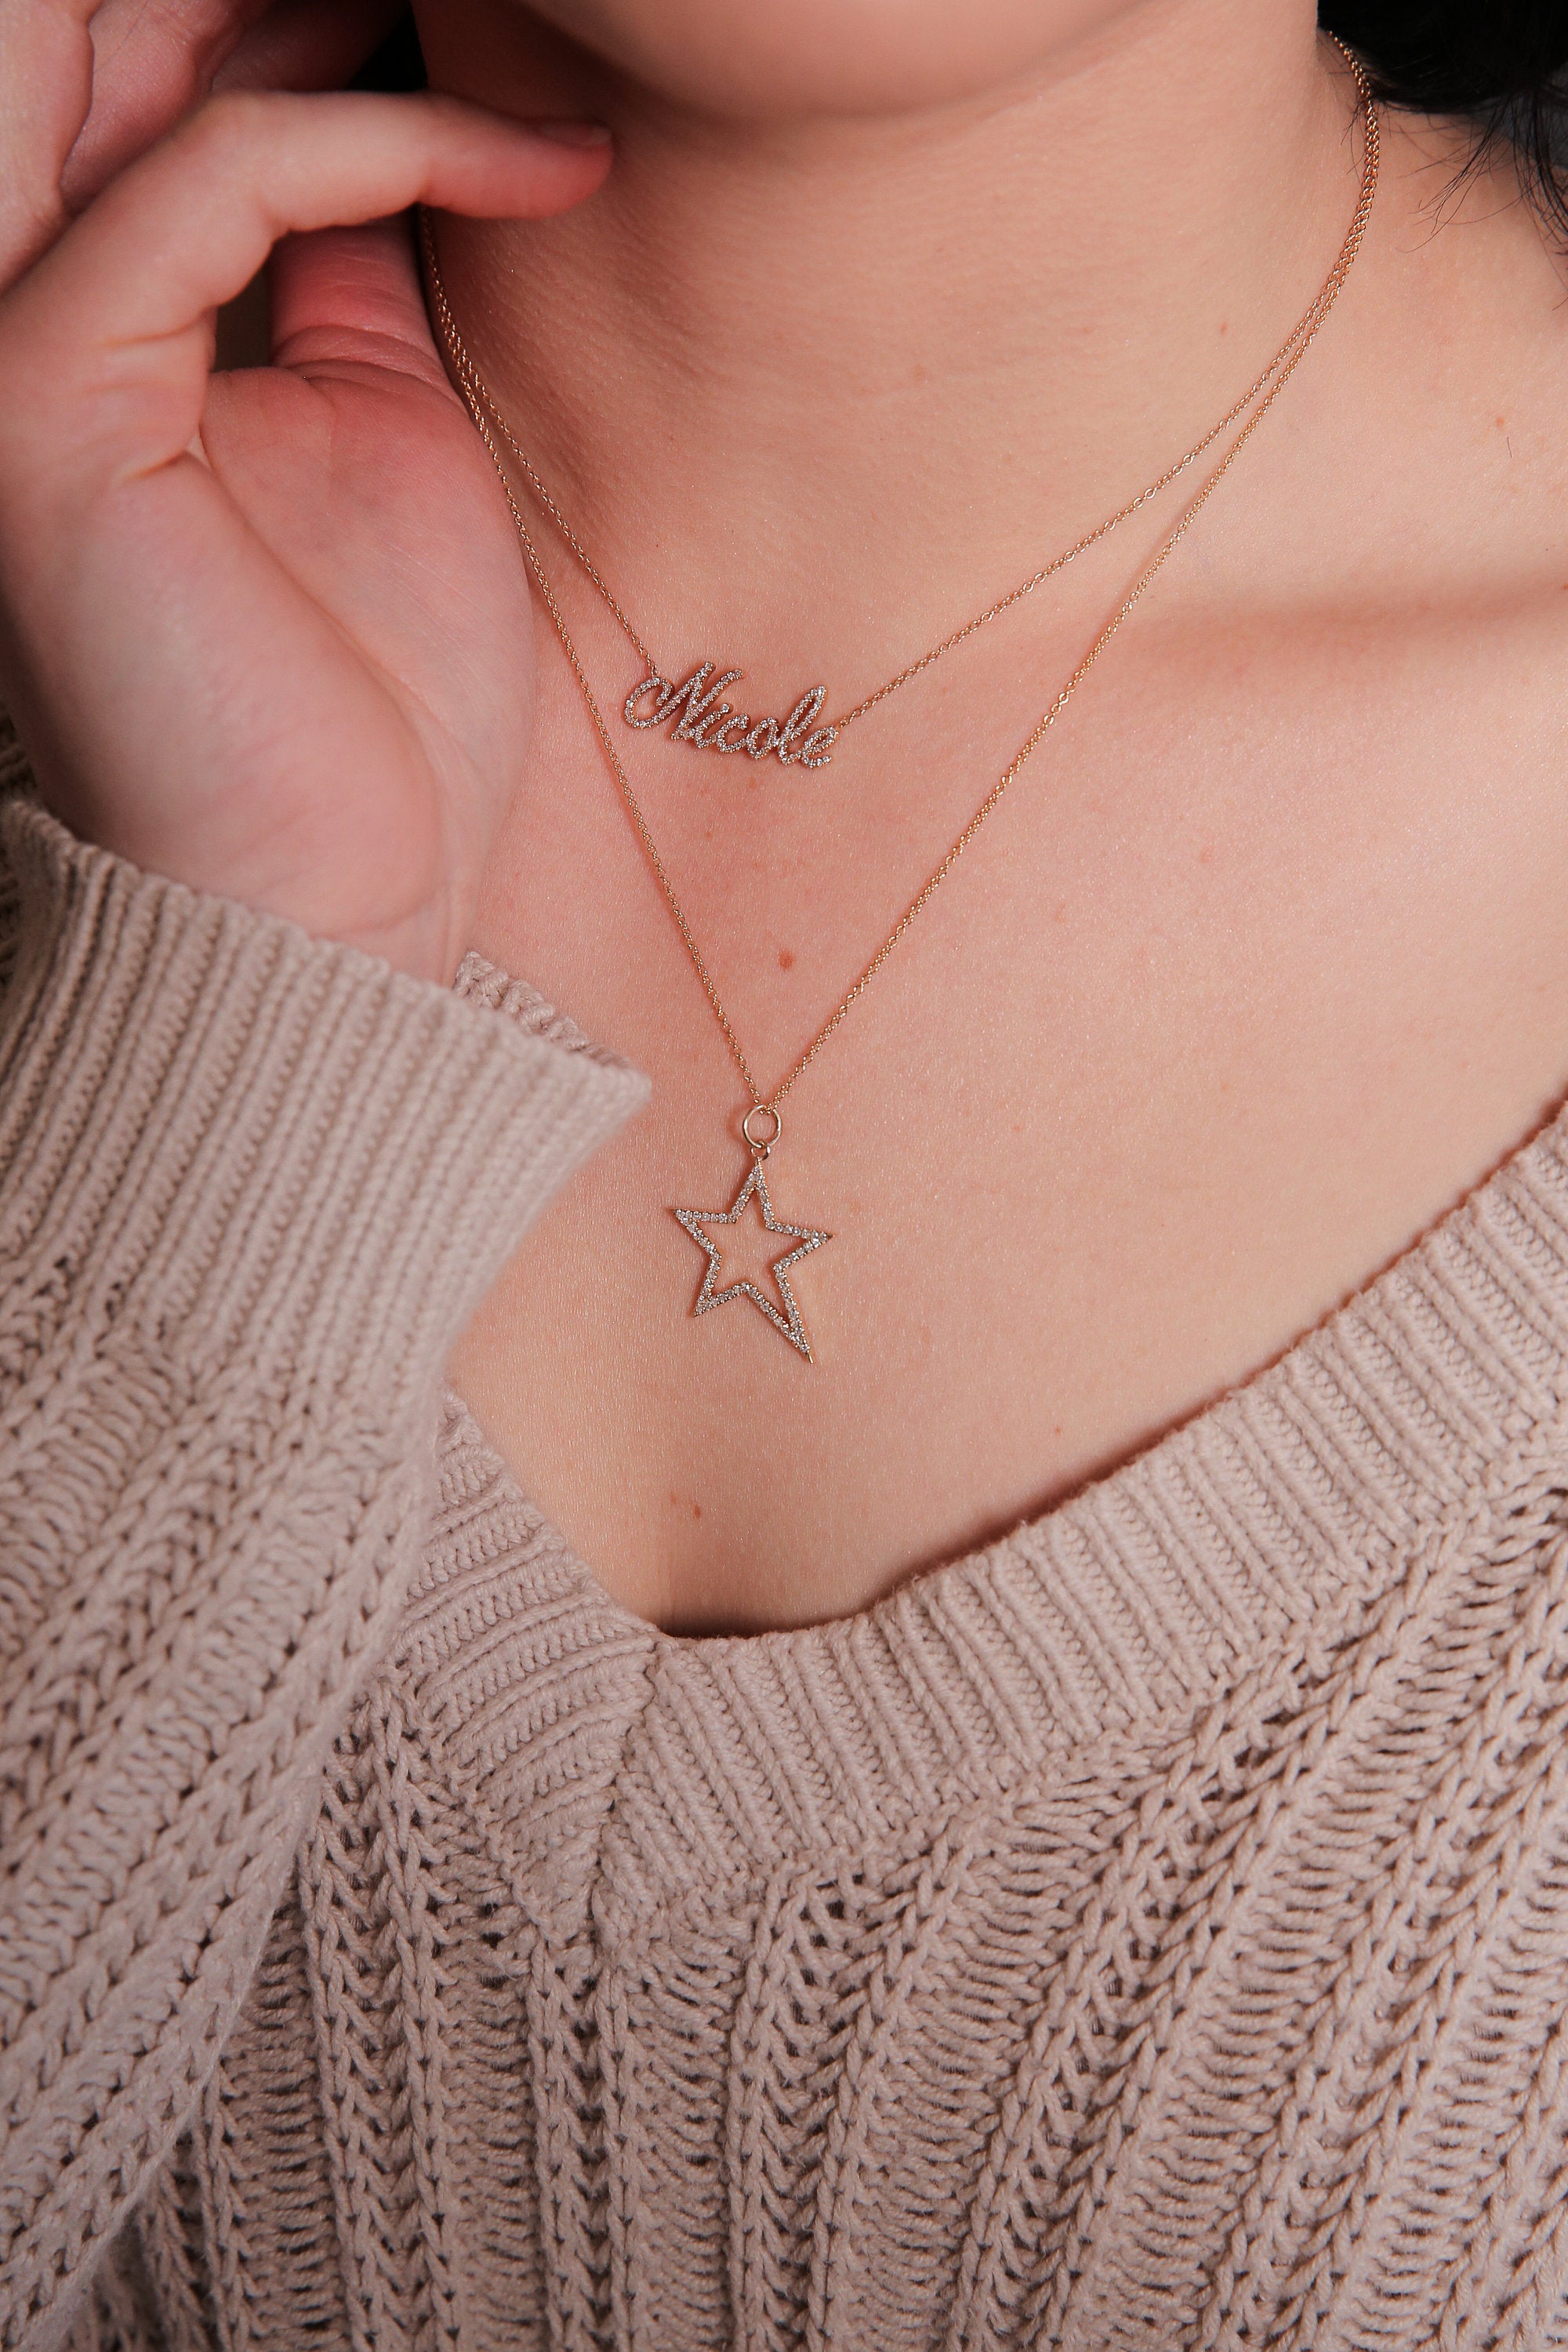 Personalised diamond 4 sided spinning bar necklace - Amy Russell Taylor